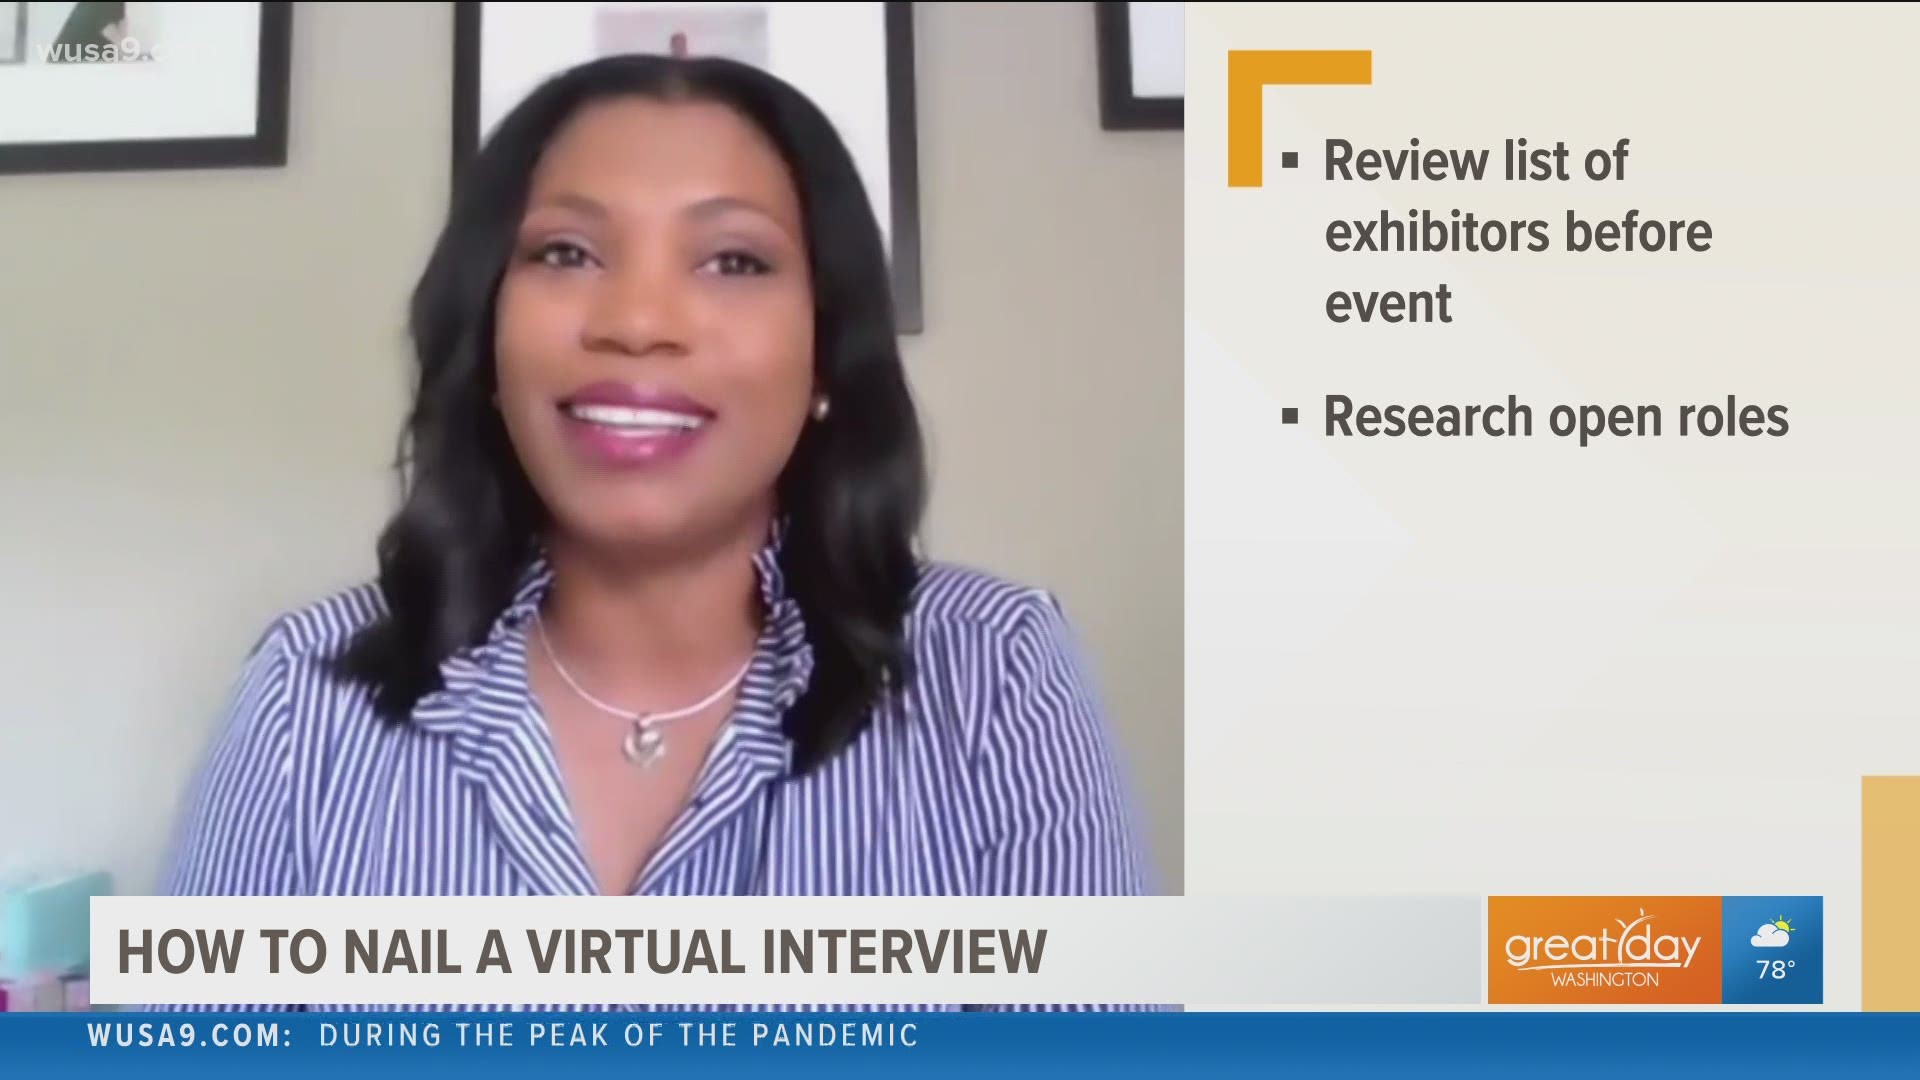 her best tips on how to stand out and land the job during a virtual interview.